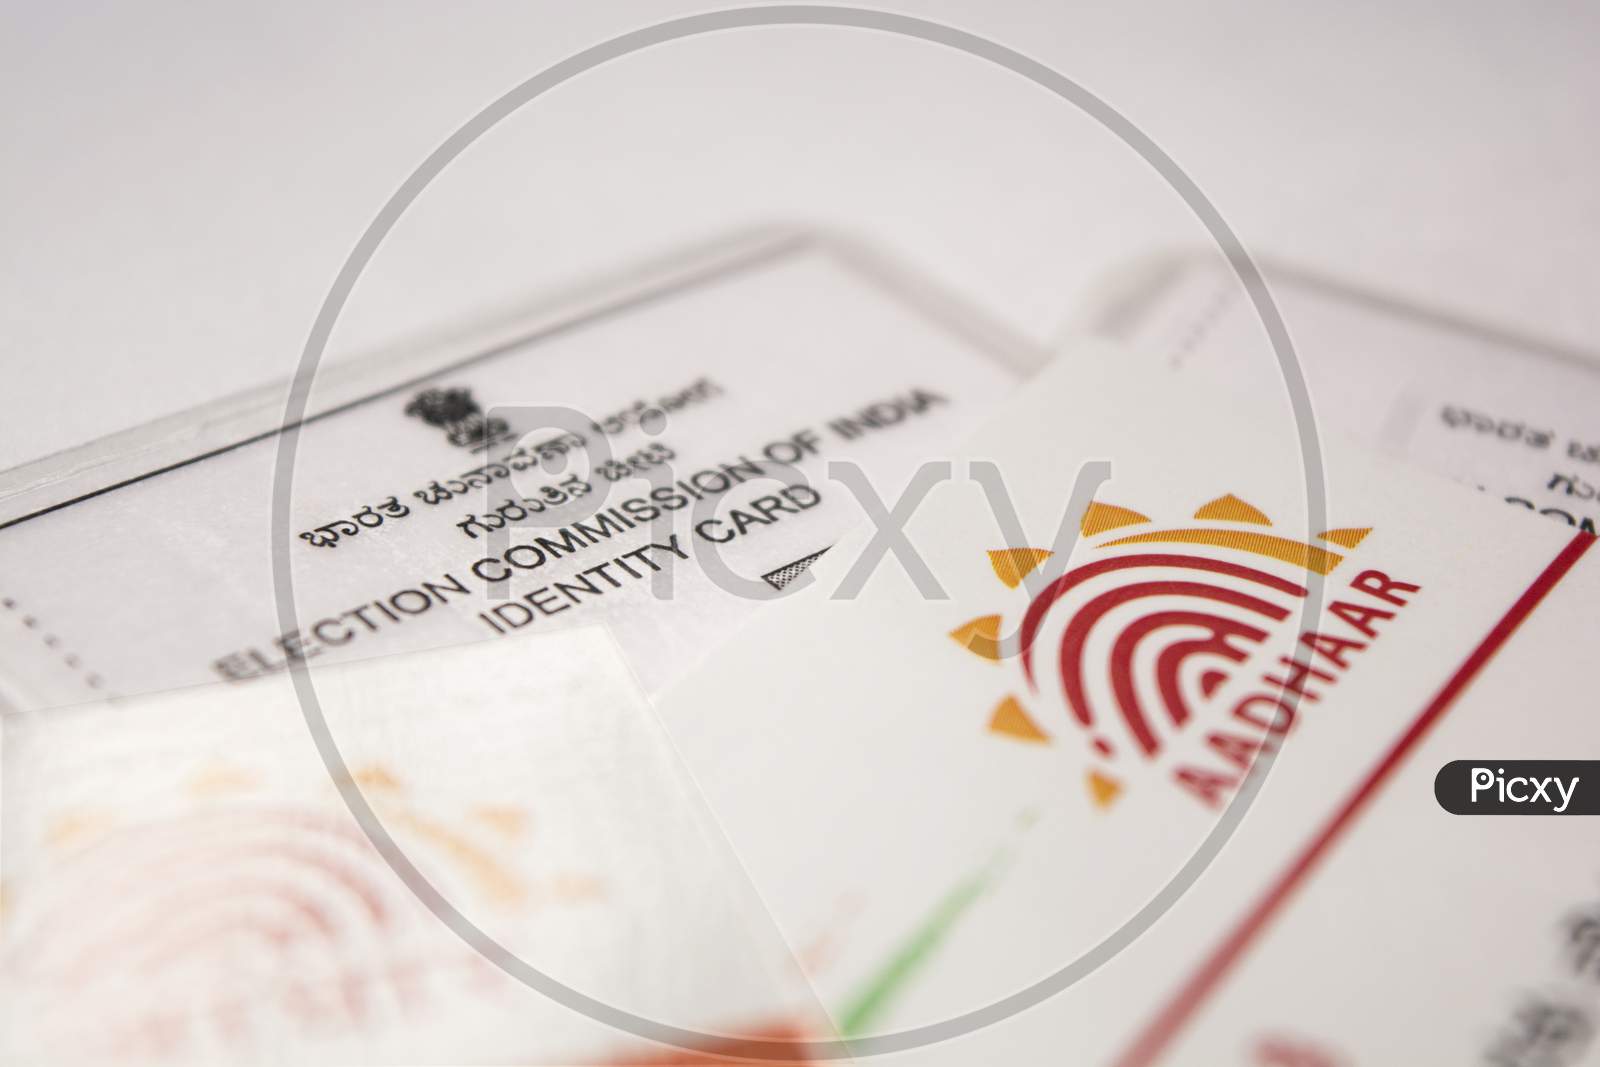 Close up shot of Aadhar and Election Commission of India Identity Card